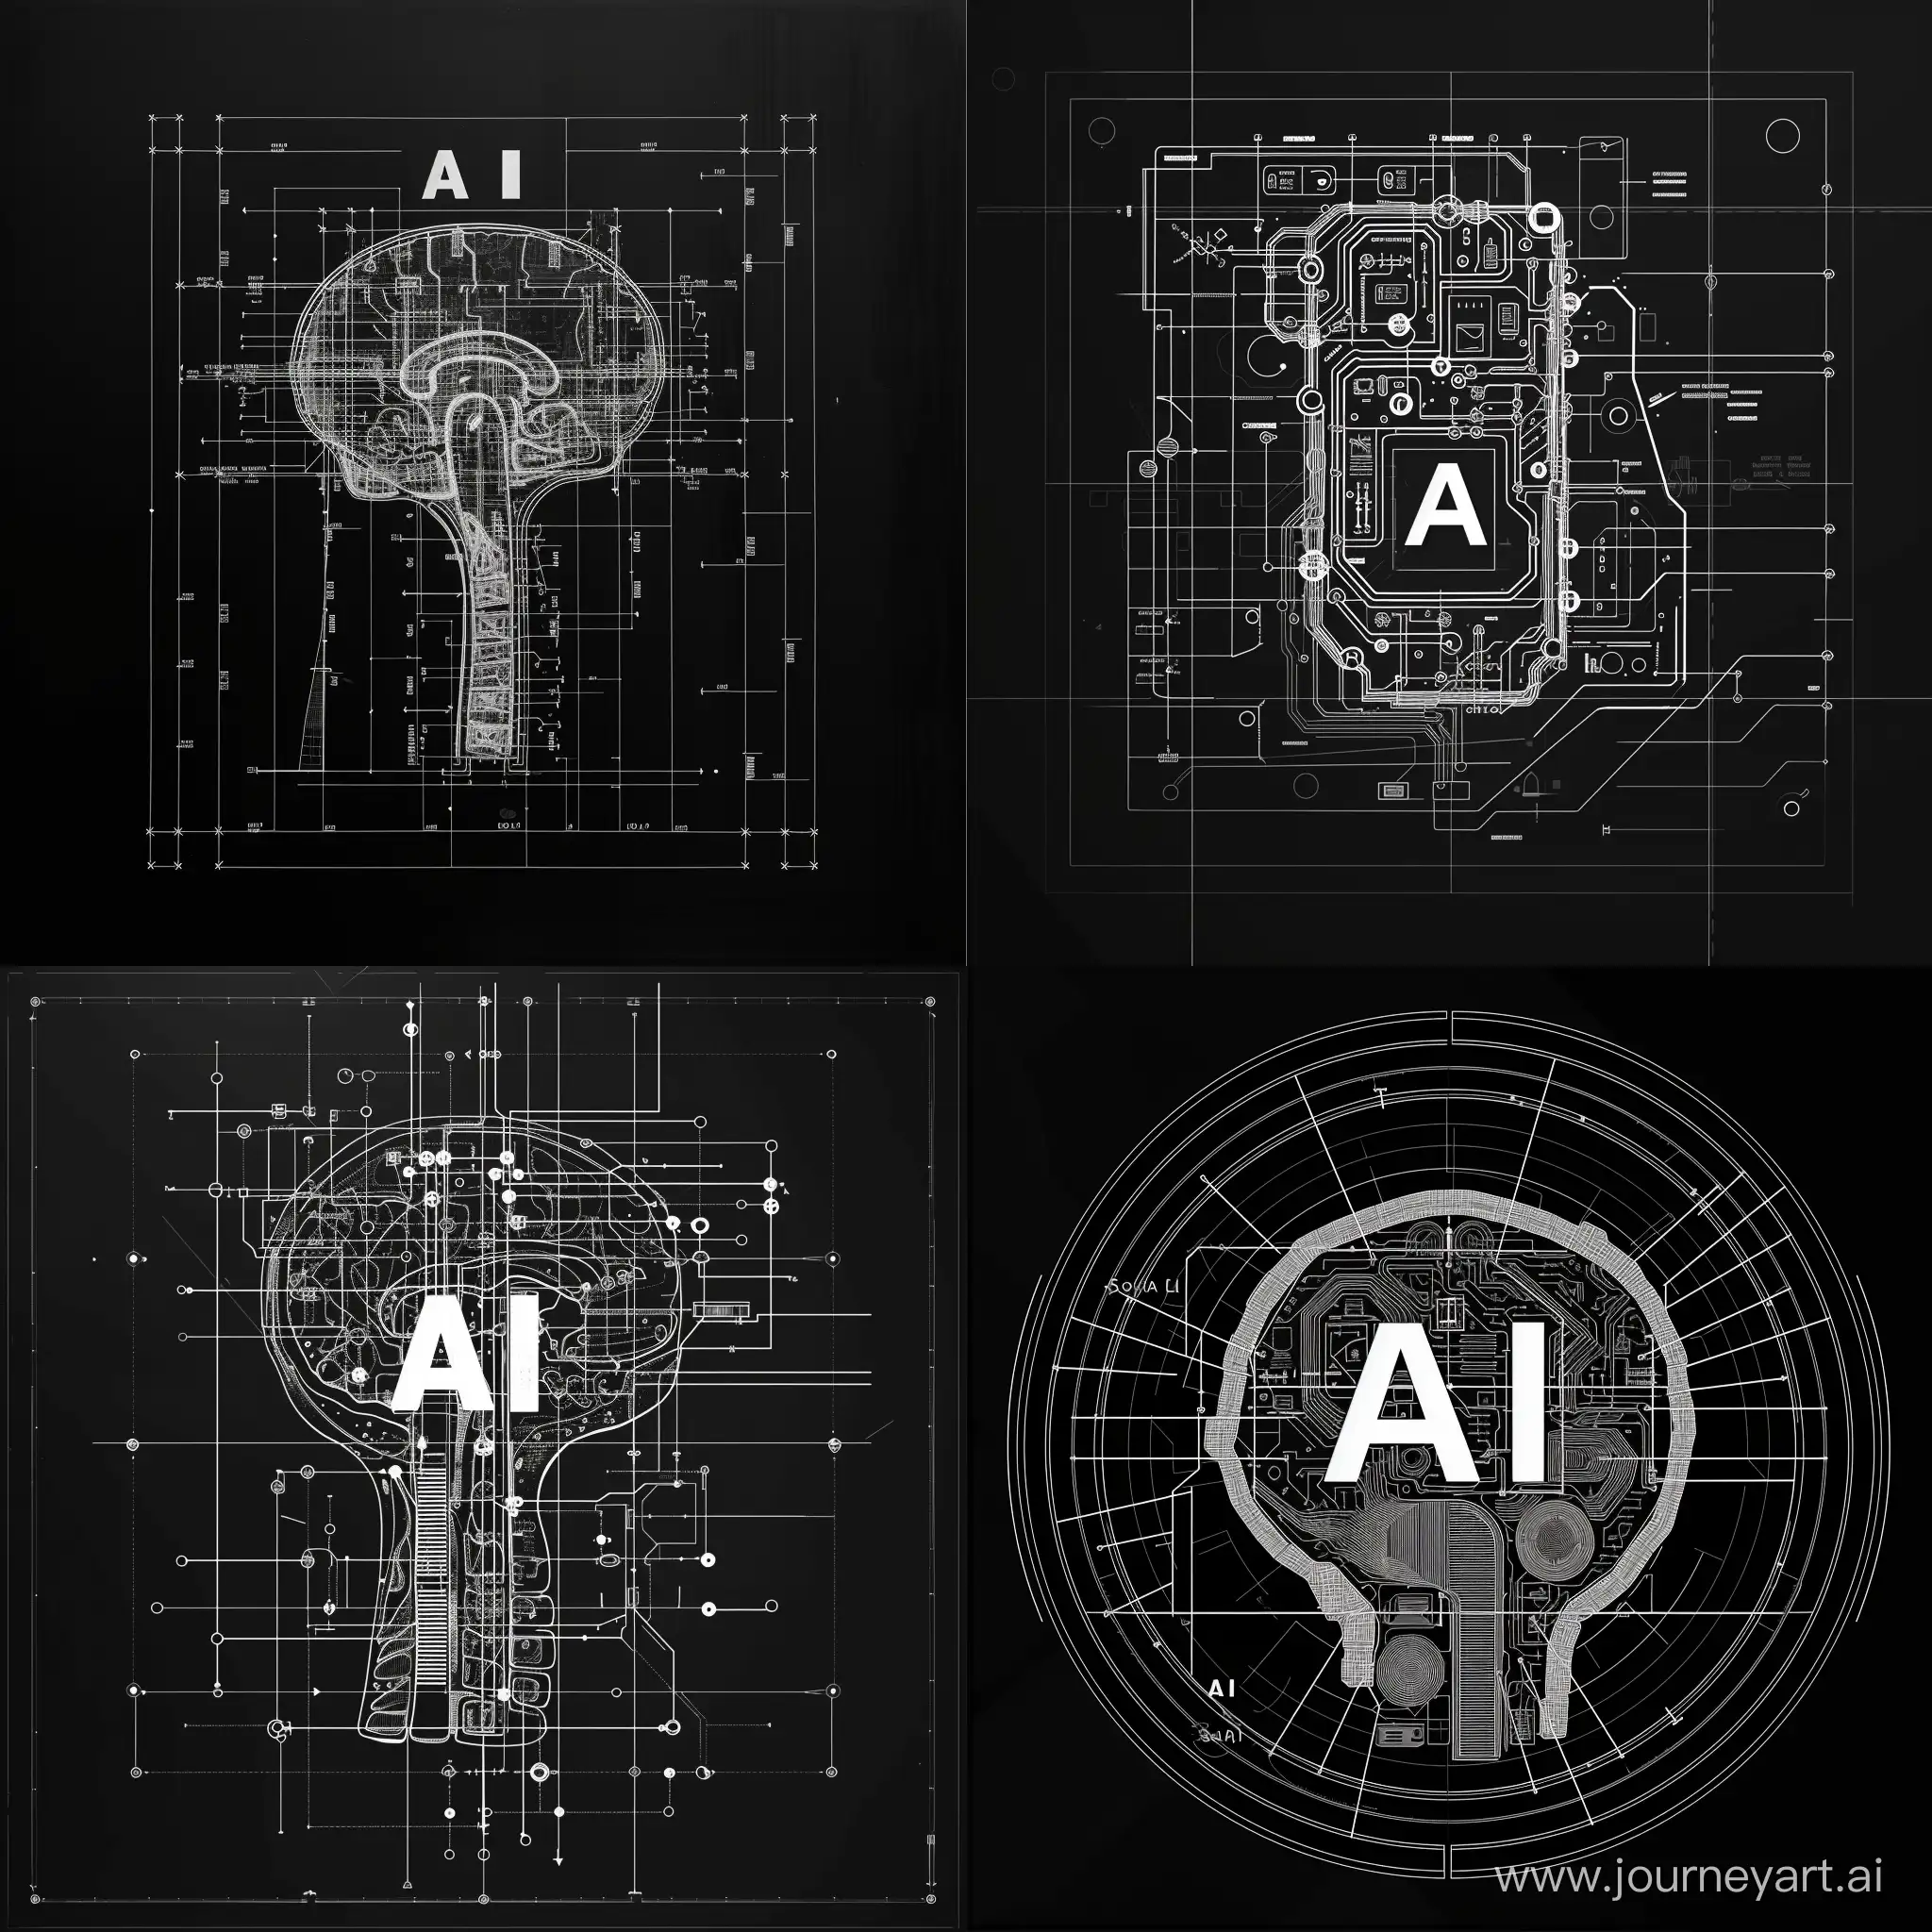 flat graphic icon, engineering blueprint, sketch, sketch in style of davinci, futoristic, digital,do a visualization on this text: AI-Enabled, Data-Driven Problem Solving Eliminate guesswork and make informed  decisions with data insights you can rely on  to solve even the most complex challenges., black and white, text on the image "AI", black BG, center composition, picture centered around black BG
